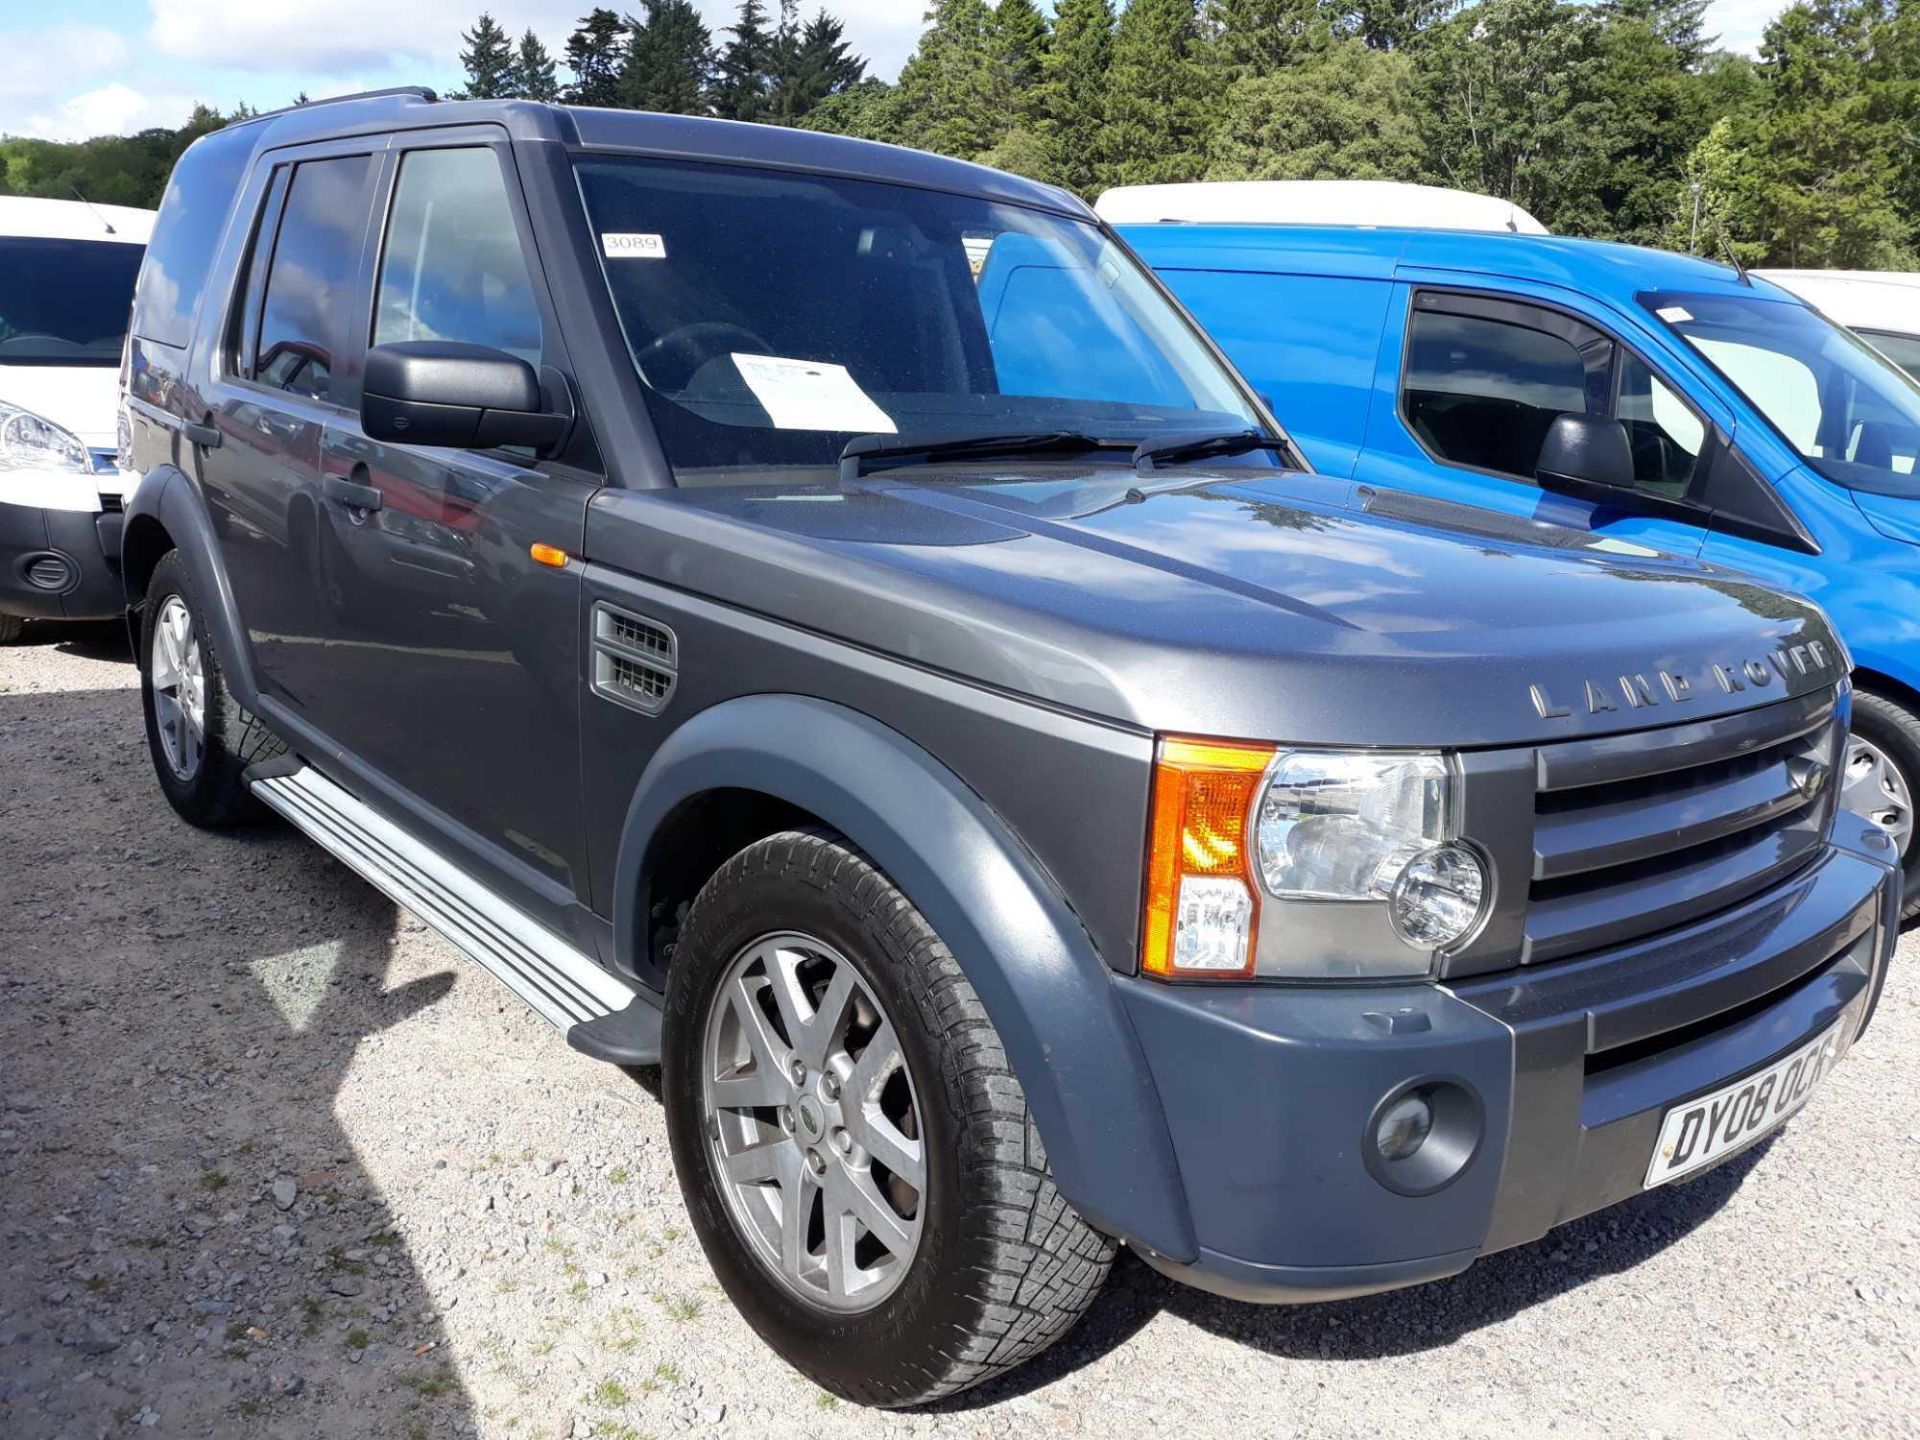 Land Rover Discovery 3 Xs Mwb - 2720cc 4x4 - Image 3 of 9